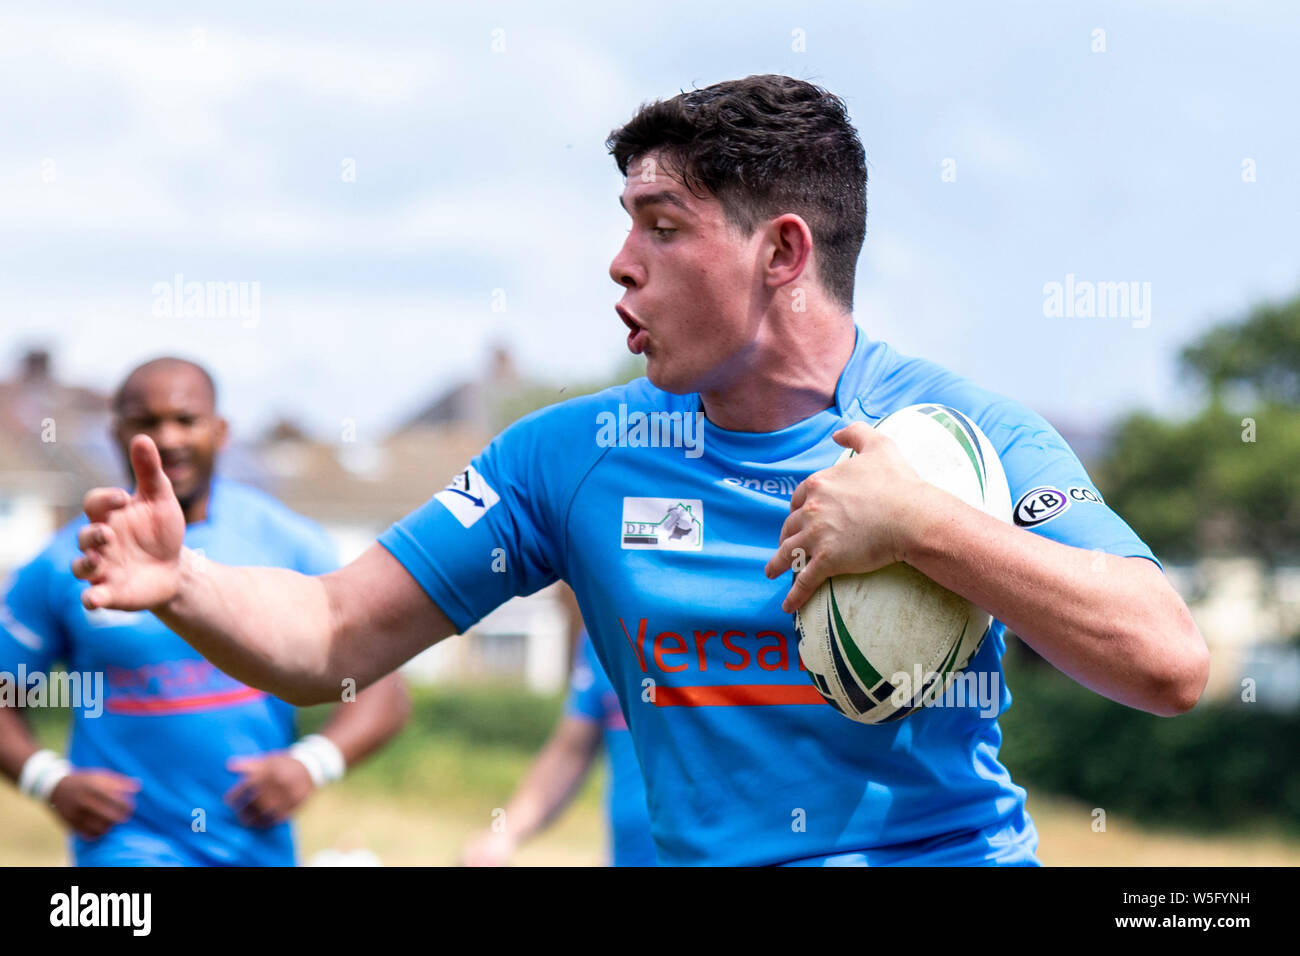 Torfaen Tigers v All Golds at New Panteg RFC in the RFL Southern Conference on the 27th July 2019. Lewis Mitchell/AGRL Stock Photo